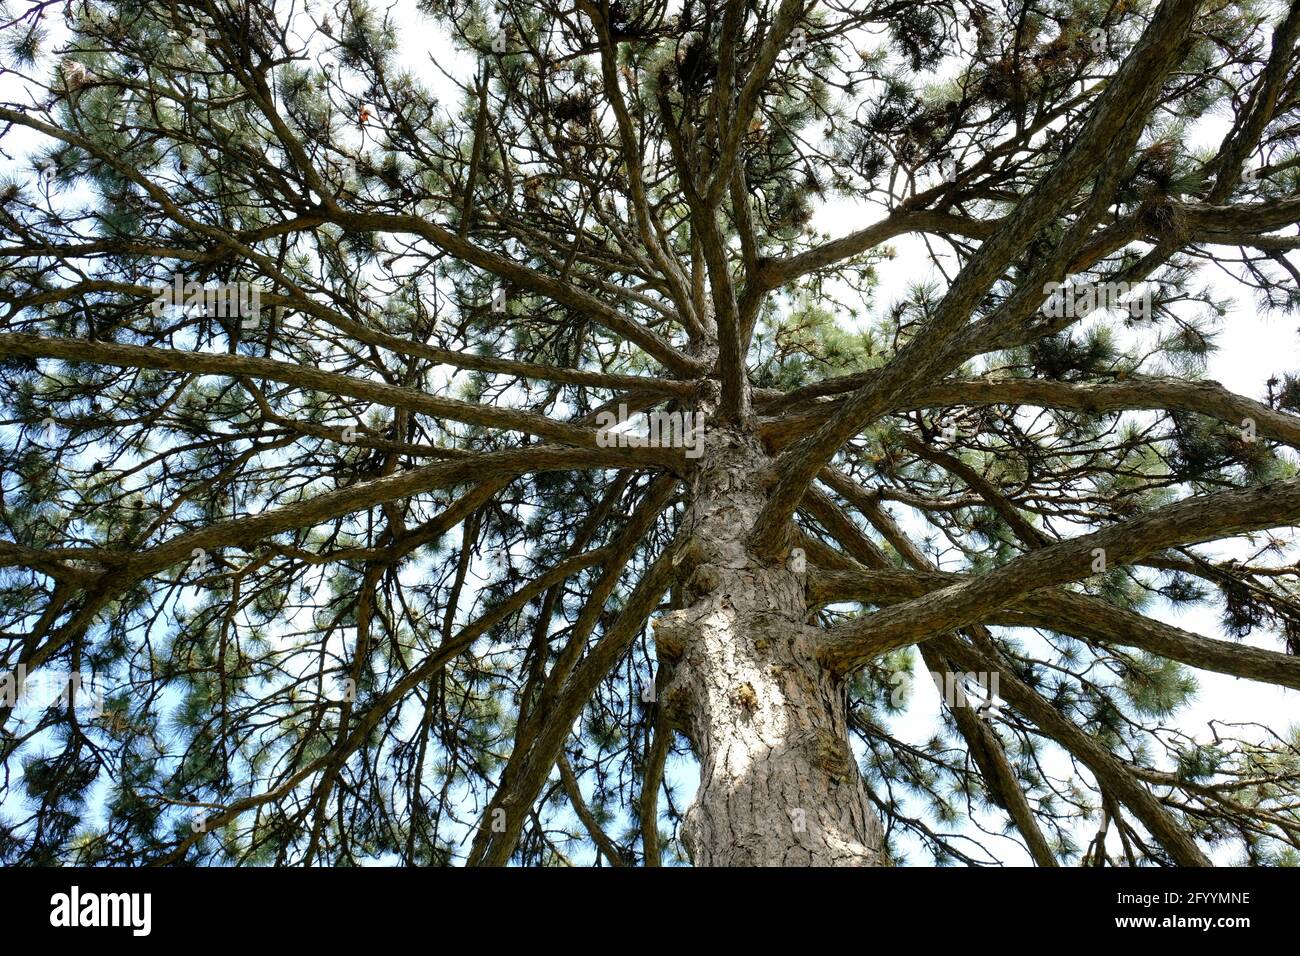 Looking up through the evenly spaced branches of an impressive eastern white pine (Pinus strobus) in Ottawa, Ontario, Canada. Stock Photo